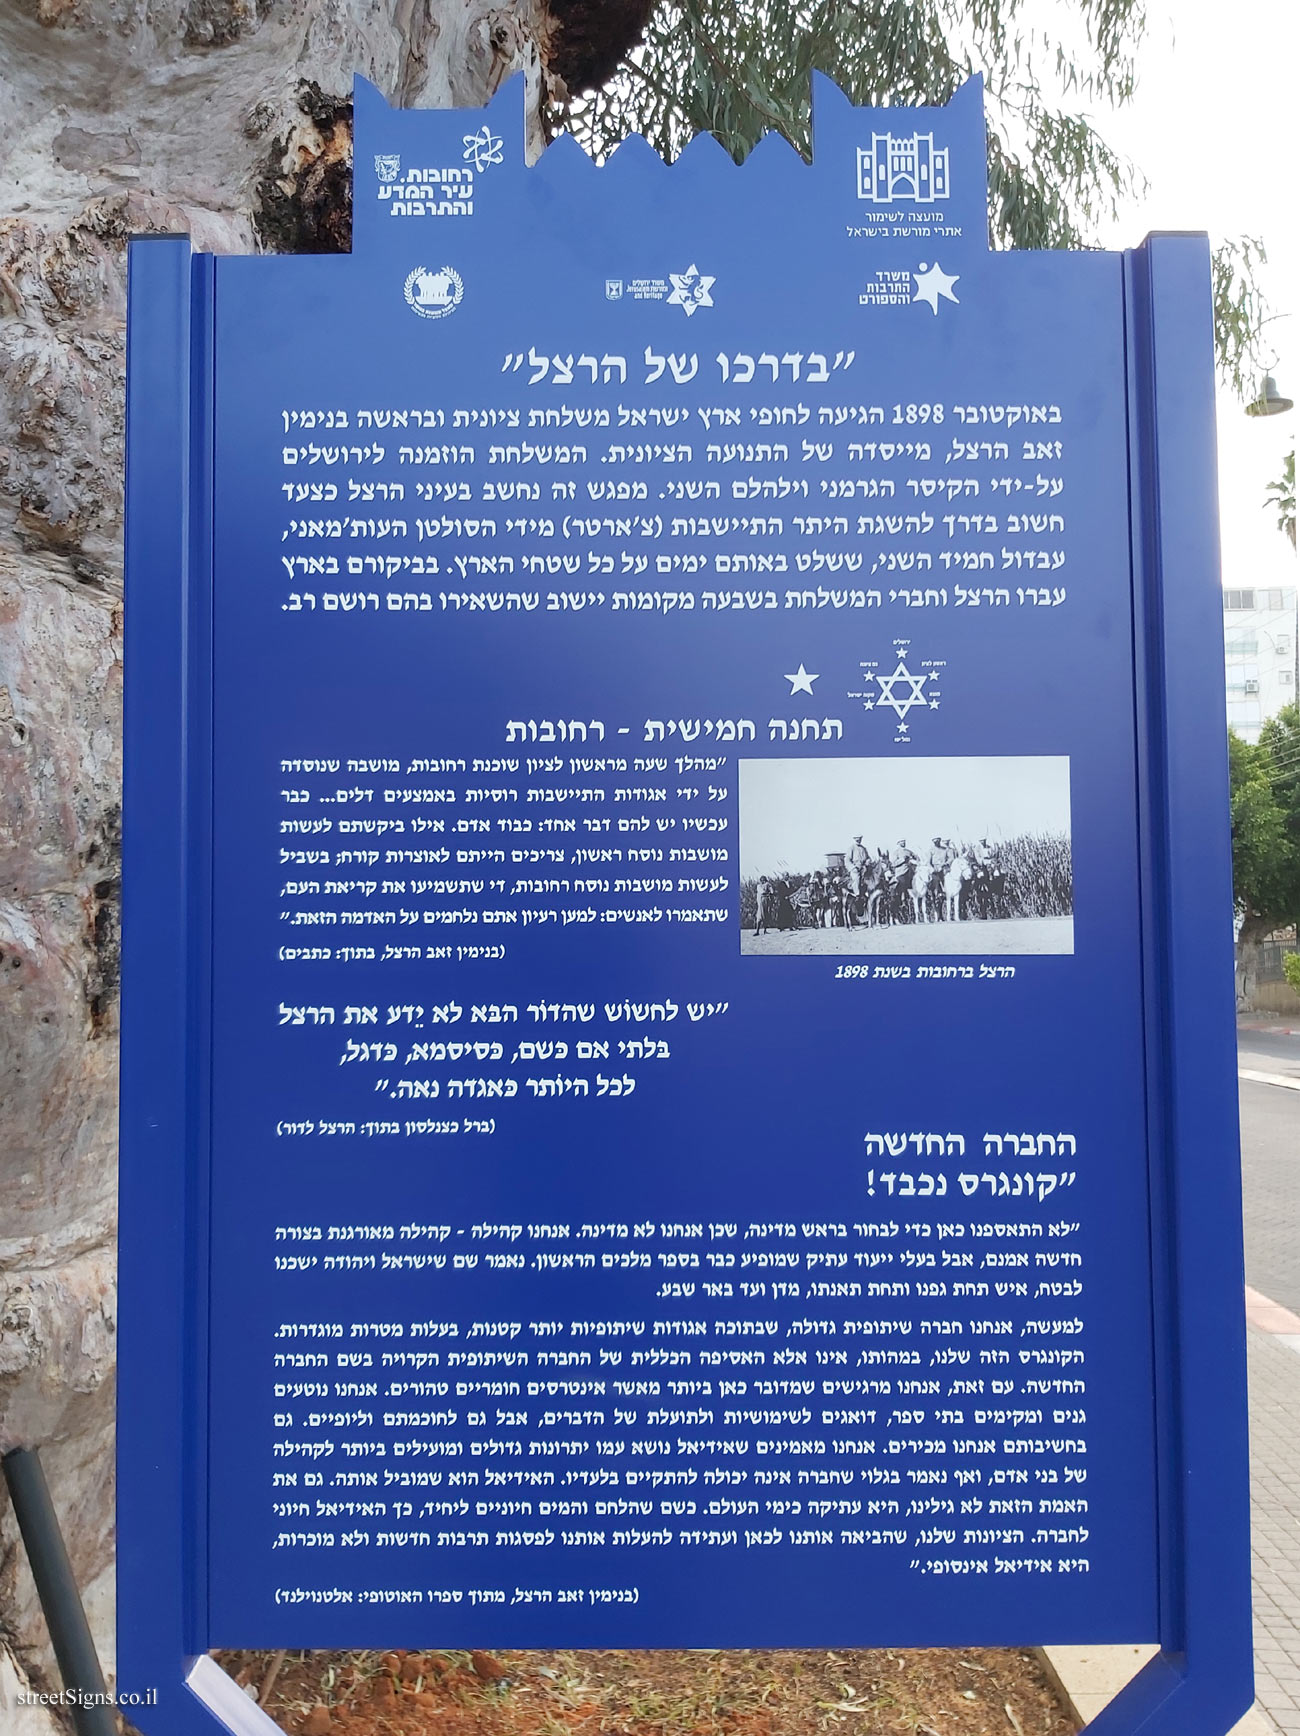 Rehovot - Heritage Sites in Israel - In Herzl’s Way - 5th Station